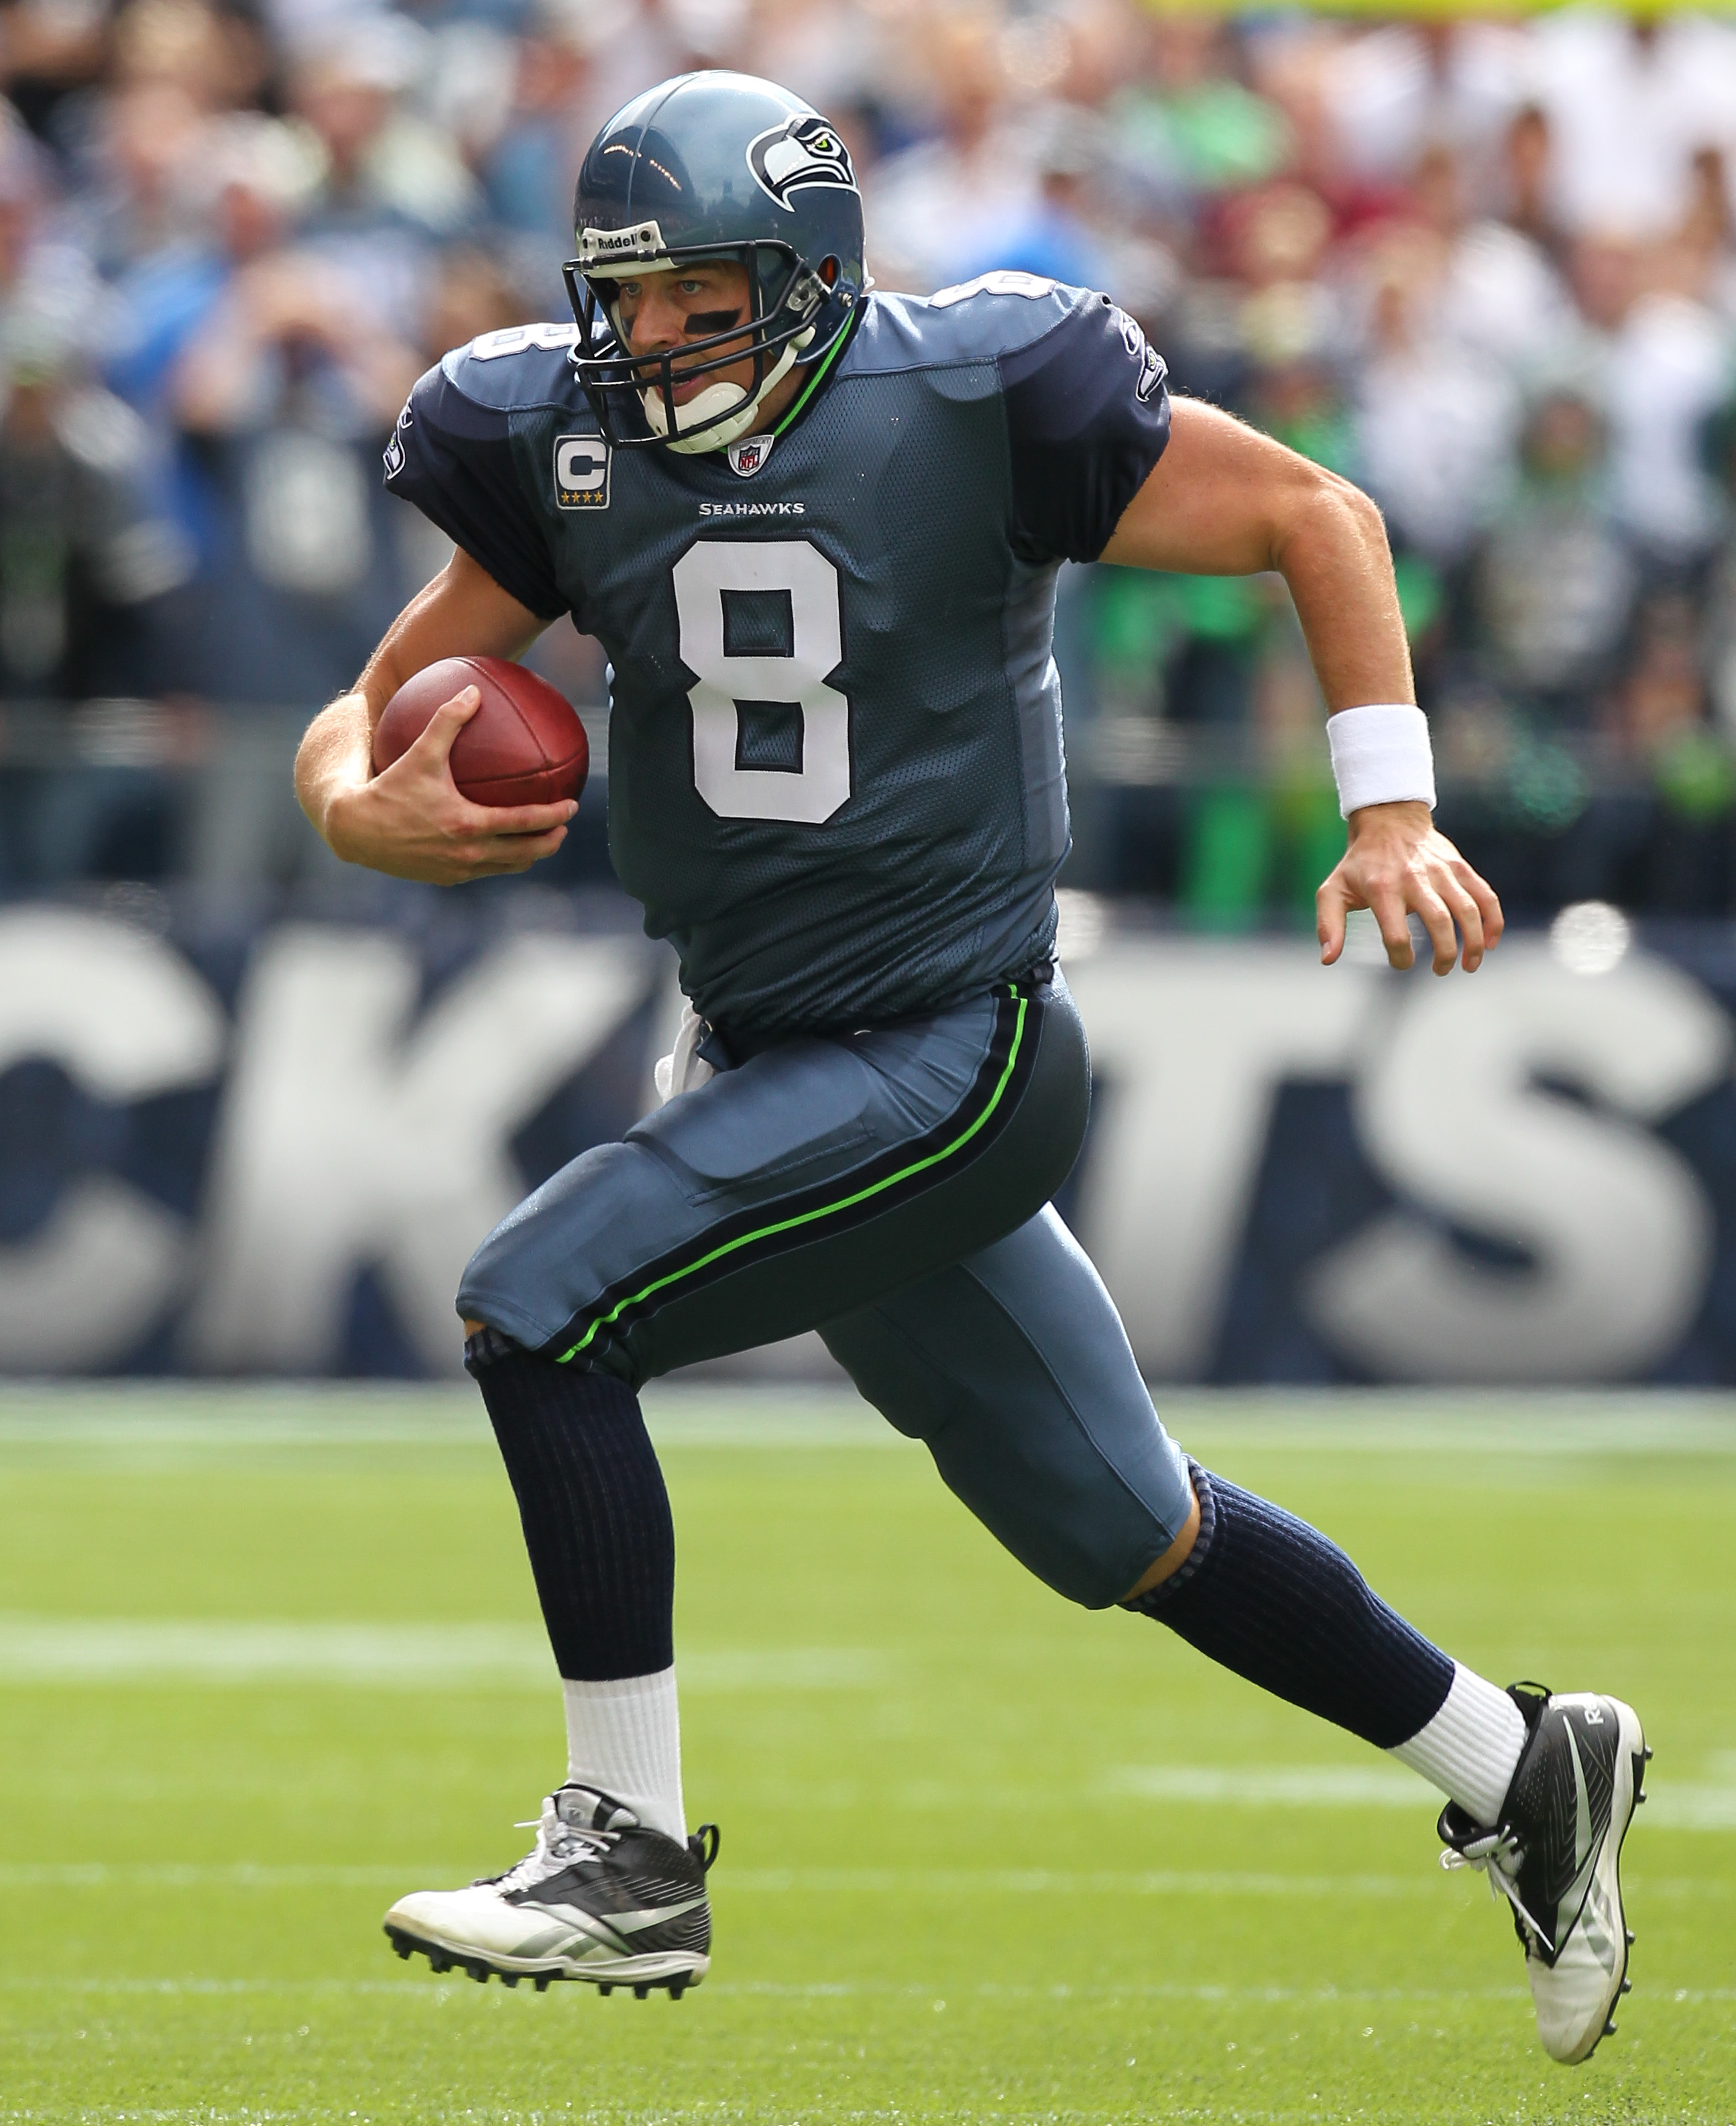 SEATTLE - SEPTEMBER 12:  Quarterback Matt Hasselbeck #8 of the Seattle Seahawks scrambles during the NFL season opener against the San Francisco 49ers at Qwest Field on September 12, 2010 in Seattle, Washington. (Photo by Otto Greule Jr/Getty Images)